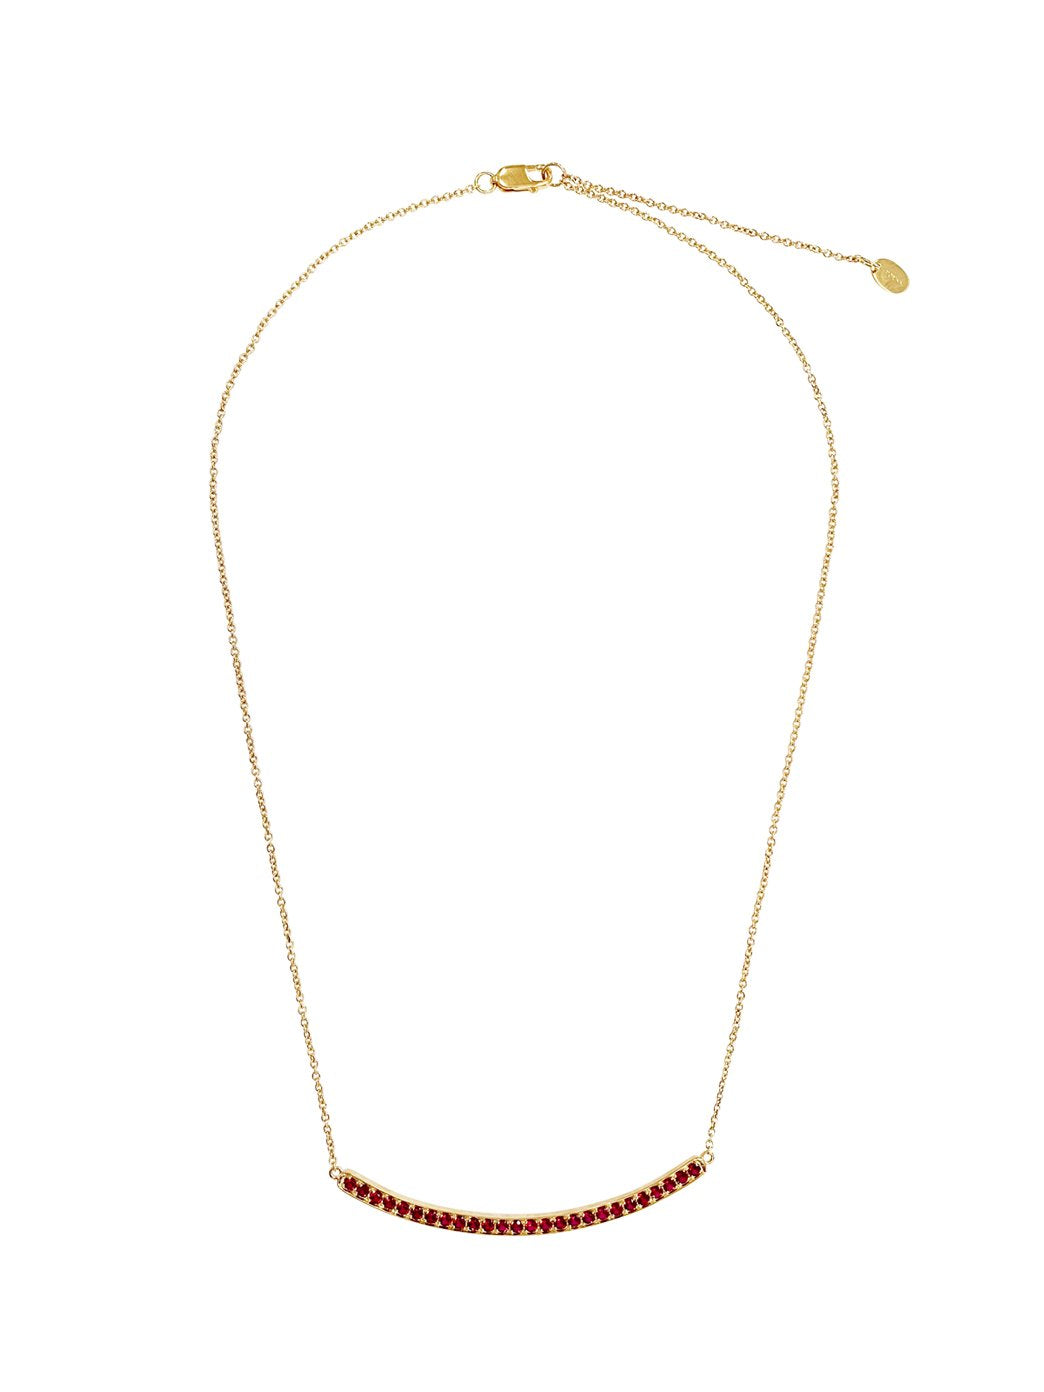 Fiorina Jewellery Arc Necklace Yellow Gold Ruby